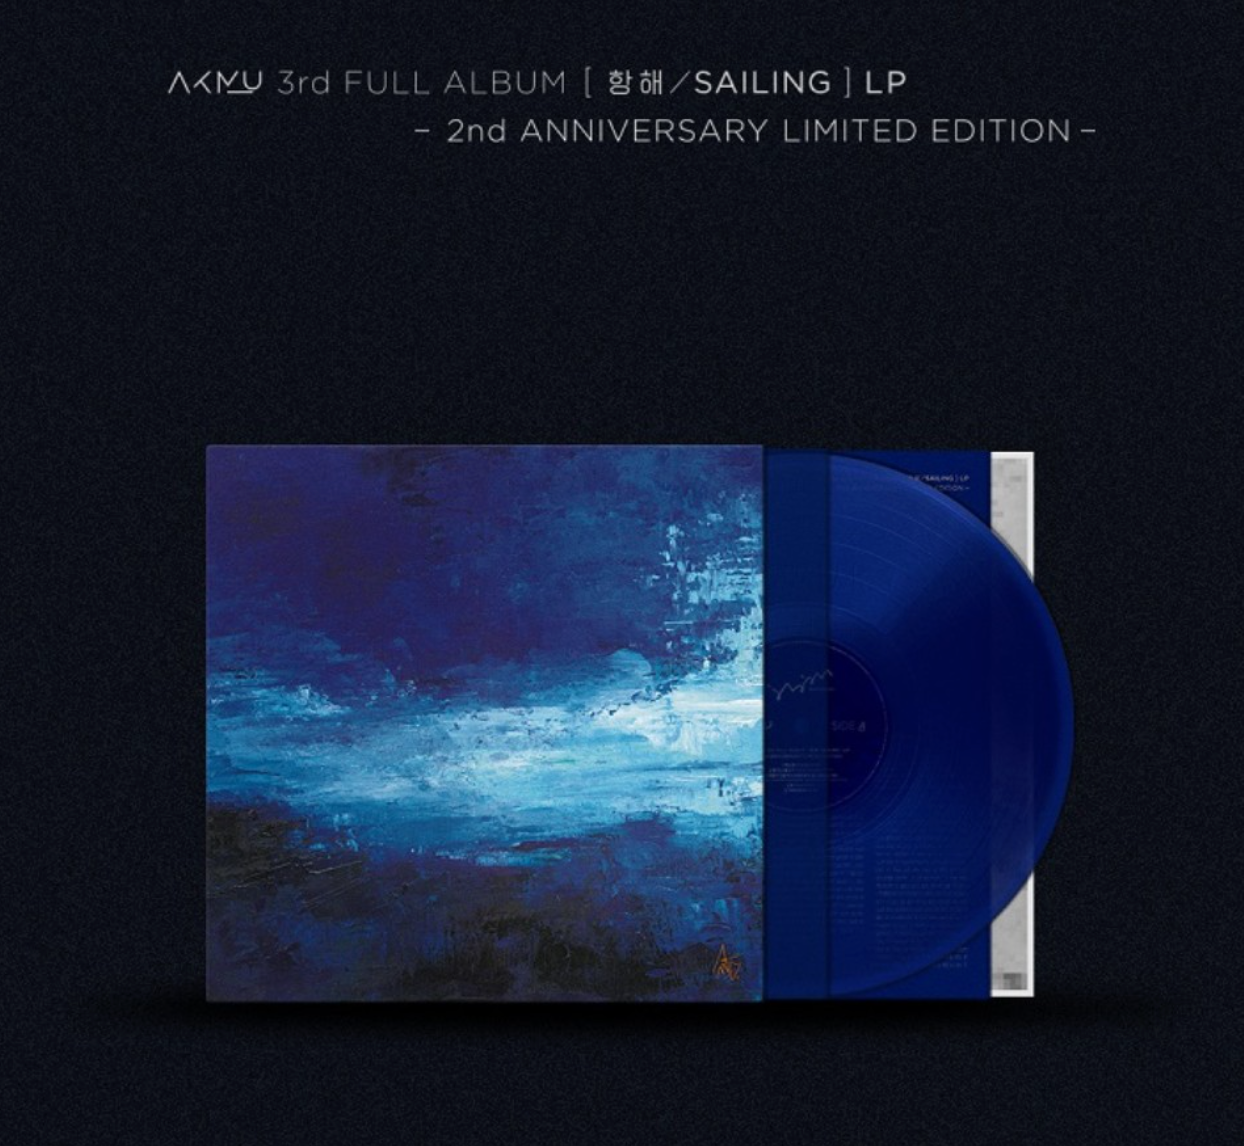 [PREORDER] AKDONG MUSICIAN - 3RD FULL ALBUM [SAILING] LP 2nd ANNIVERSARY LIMITED EDITION